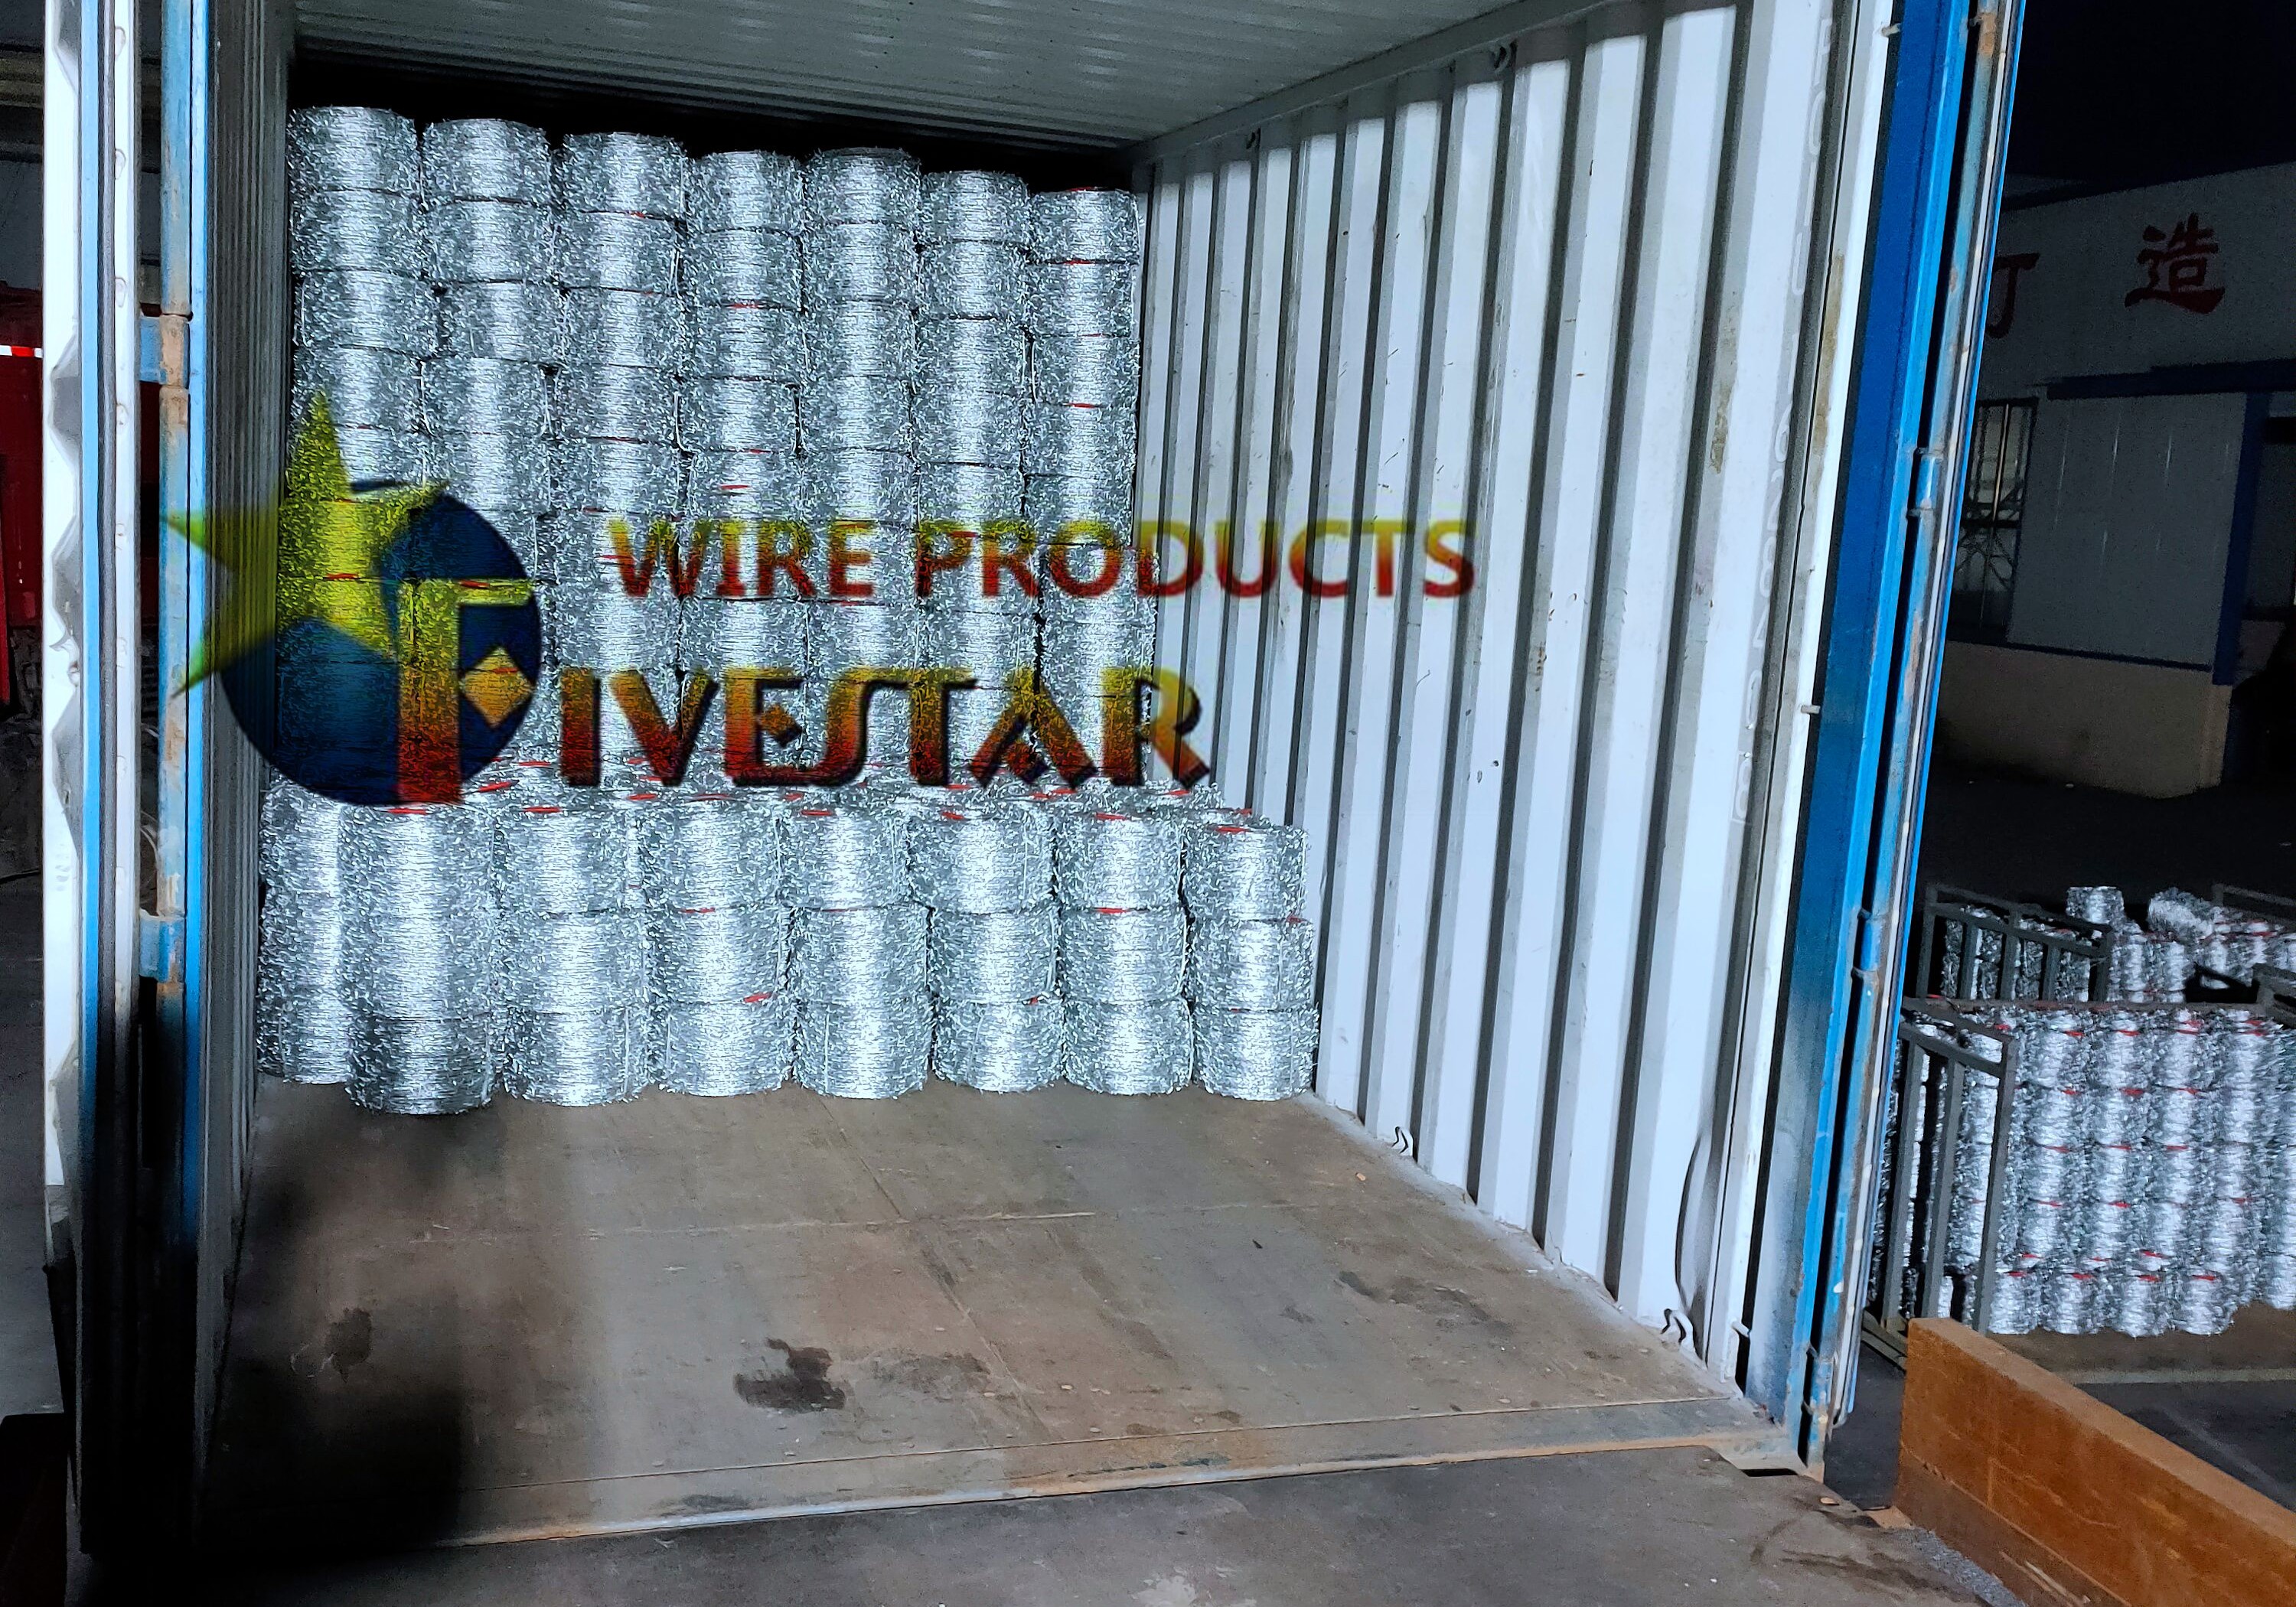 Hot dipped galvanzied barbed wire 1.6mm 500m 250kgf factory in china;galvanized barbed wire bwg16 500m 350kgf barbed wire factory in china